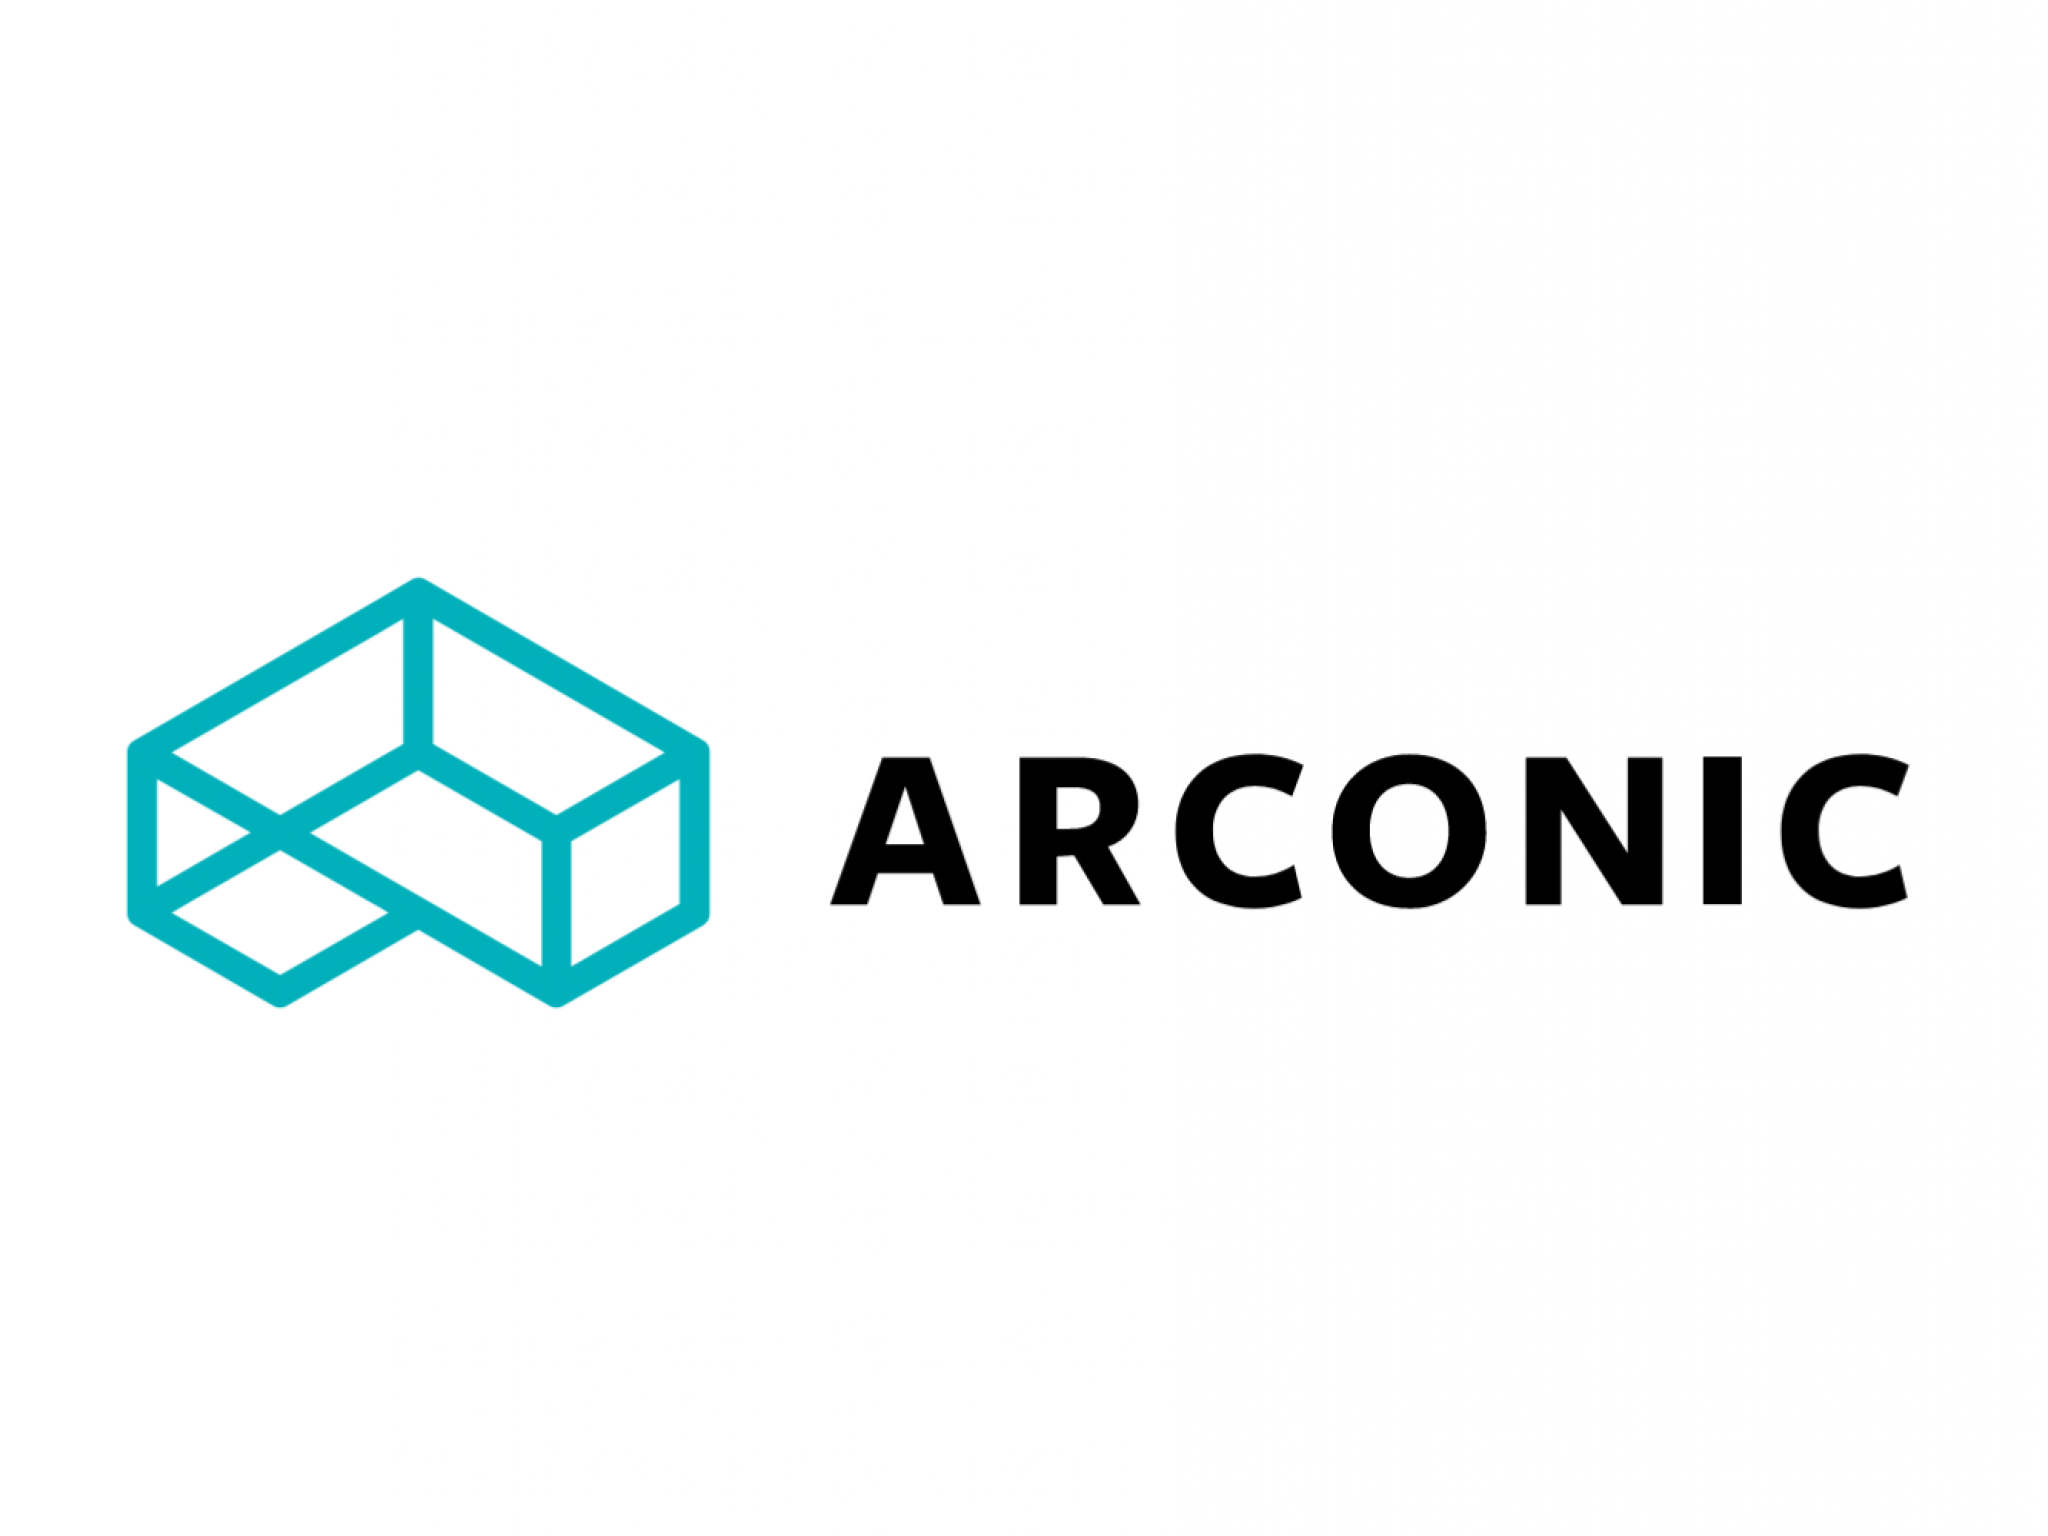  private-equity-apollo-global-nears-arconic-3b-deal-report 